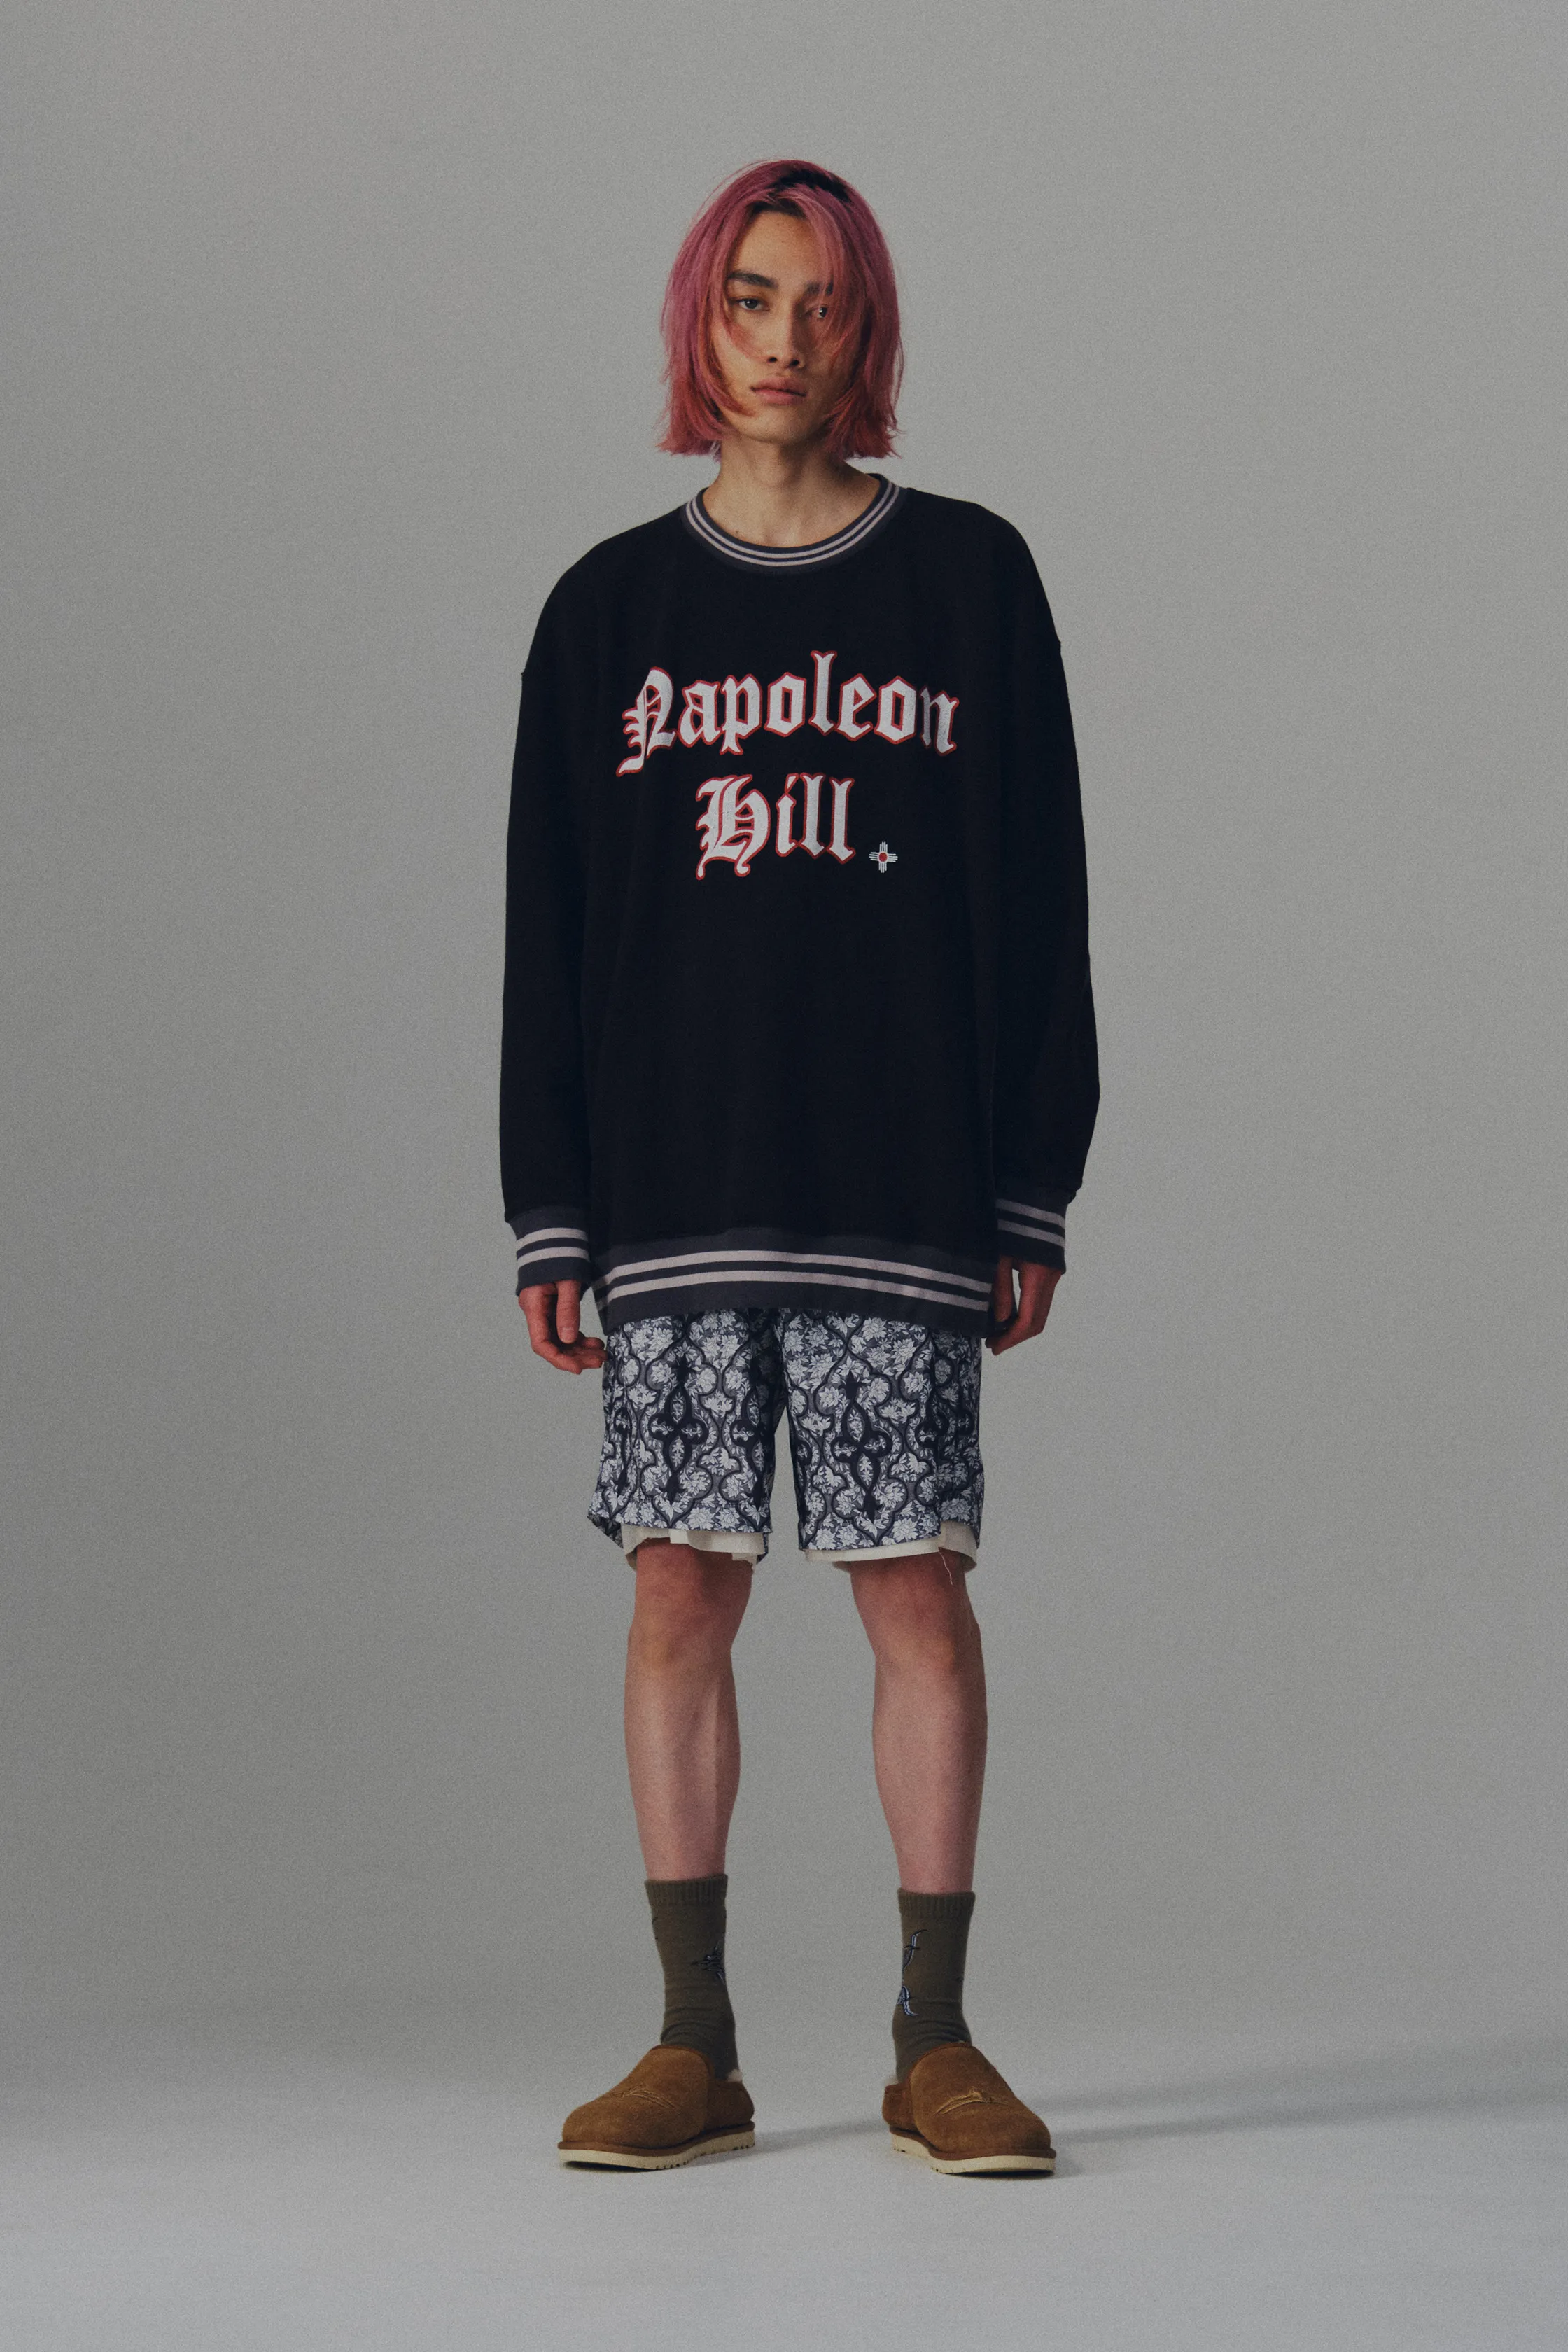 00032-Children-of-the-Discordance-Mens-Fall-22-credit-brand.png